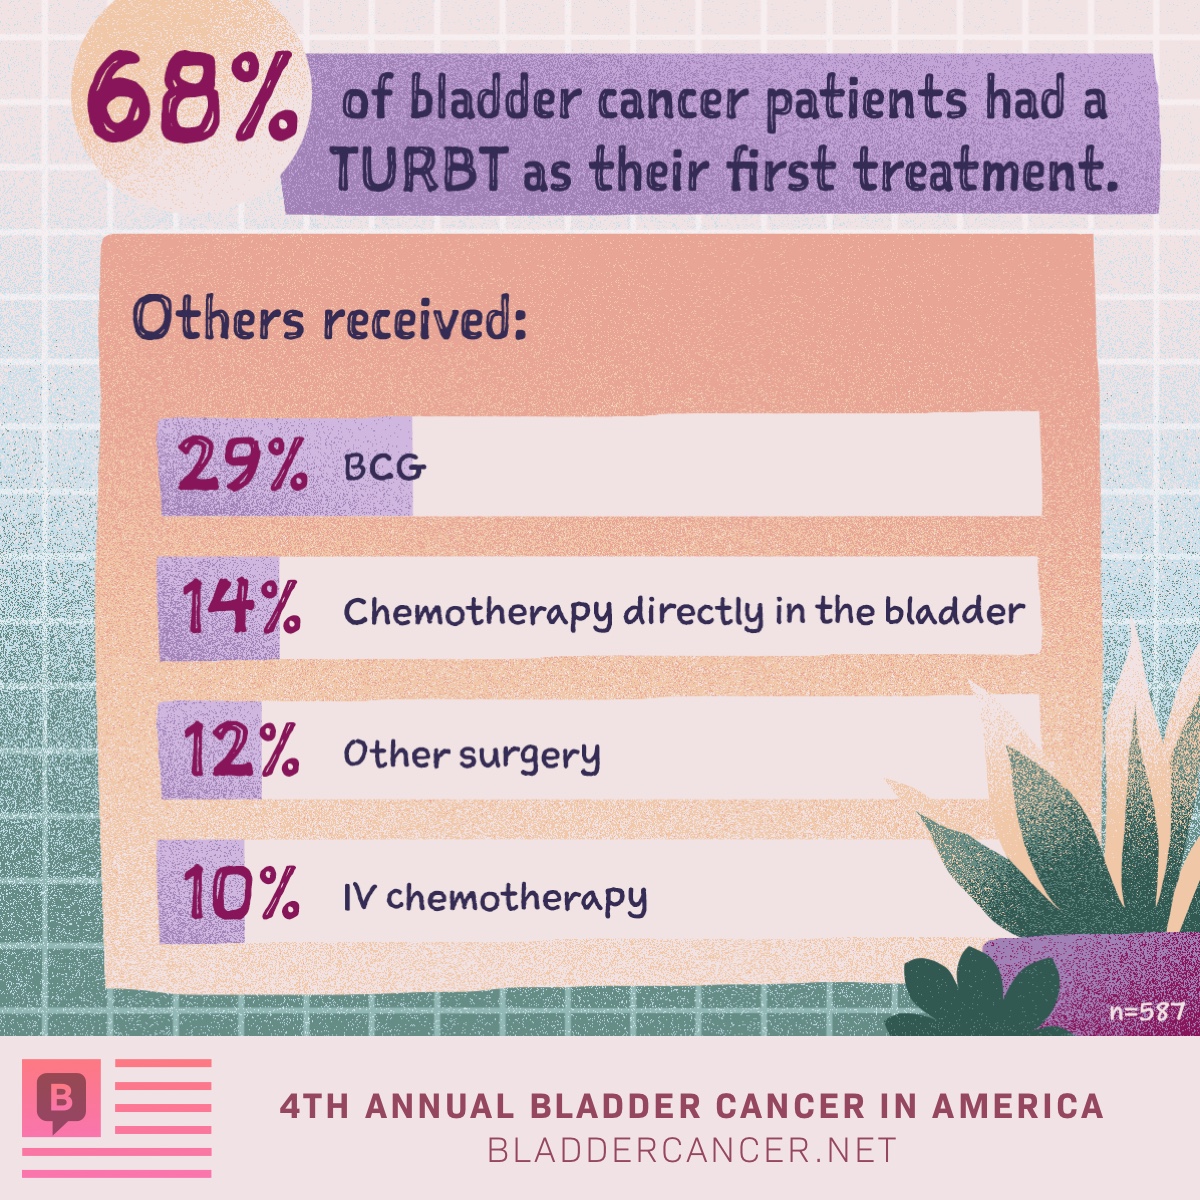 68% of bladder cancer patients had a TURBT as their first treatment.